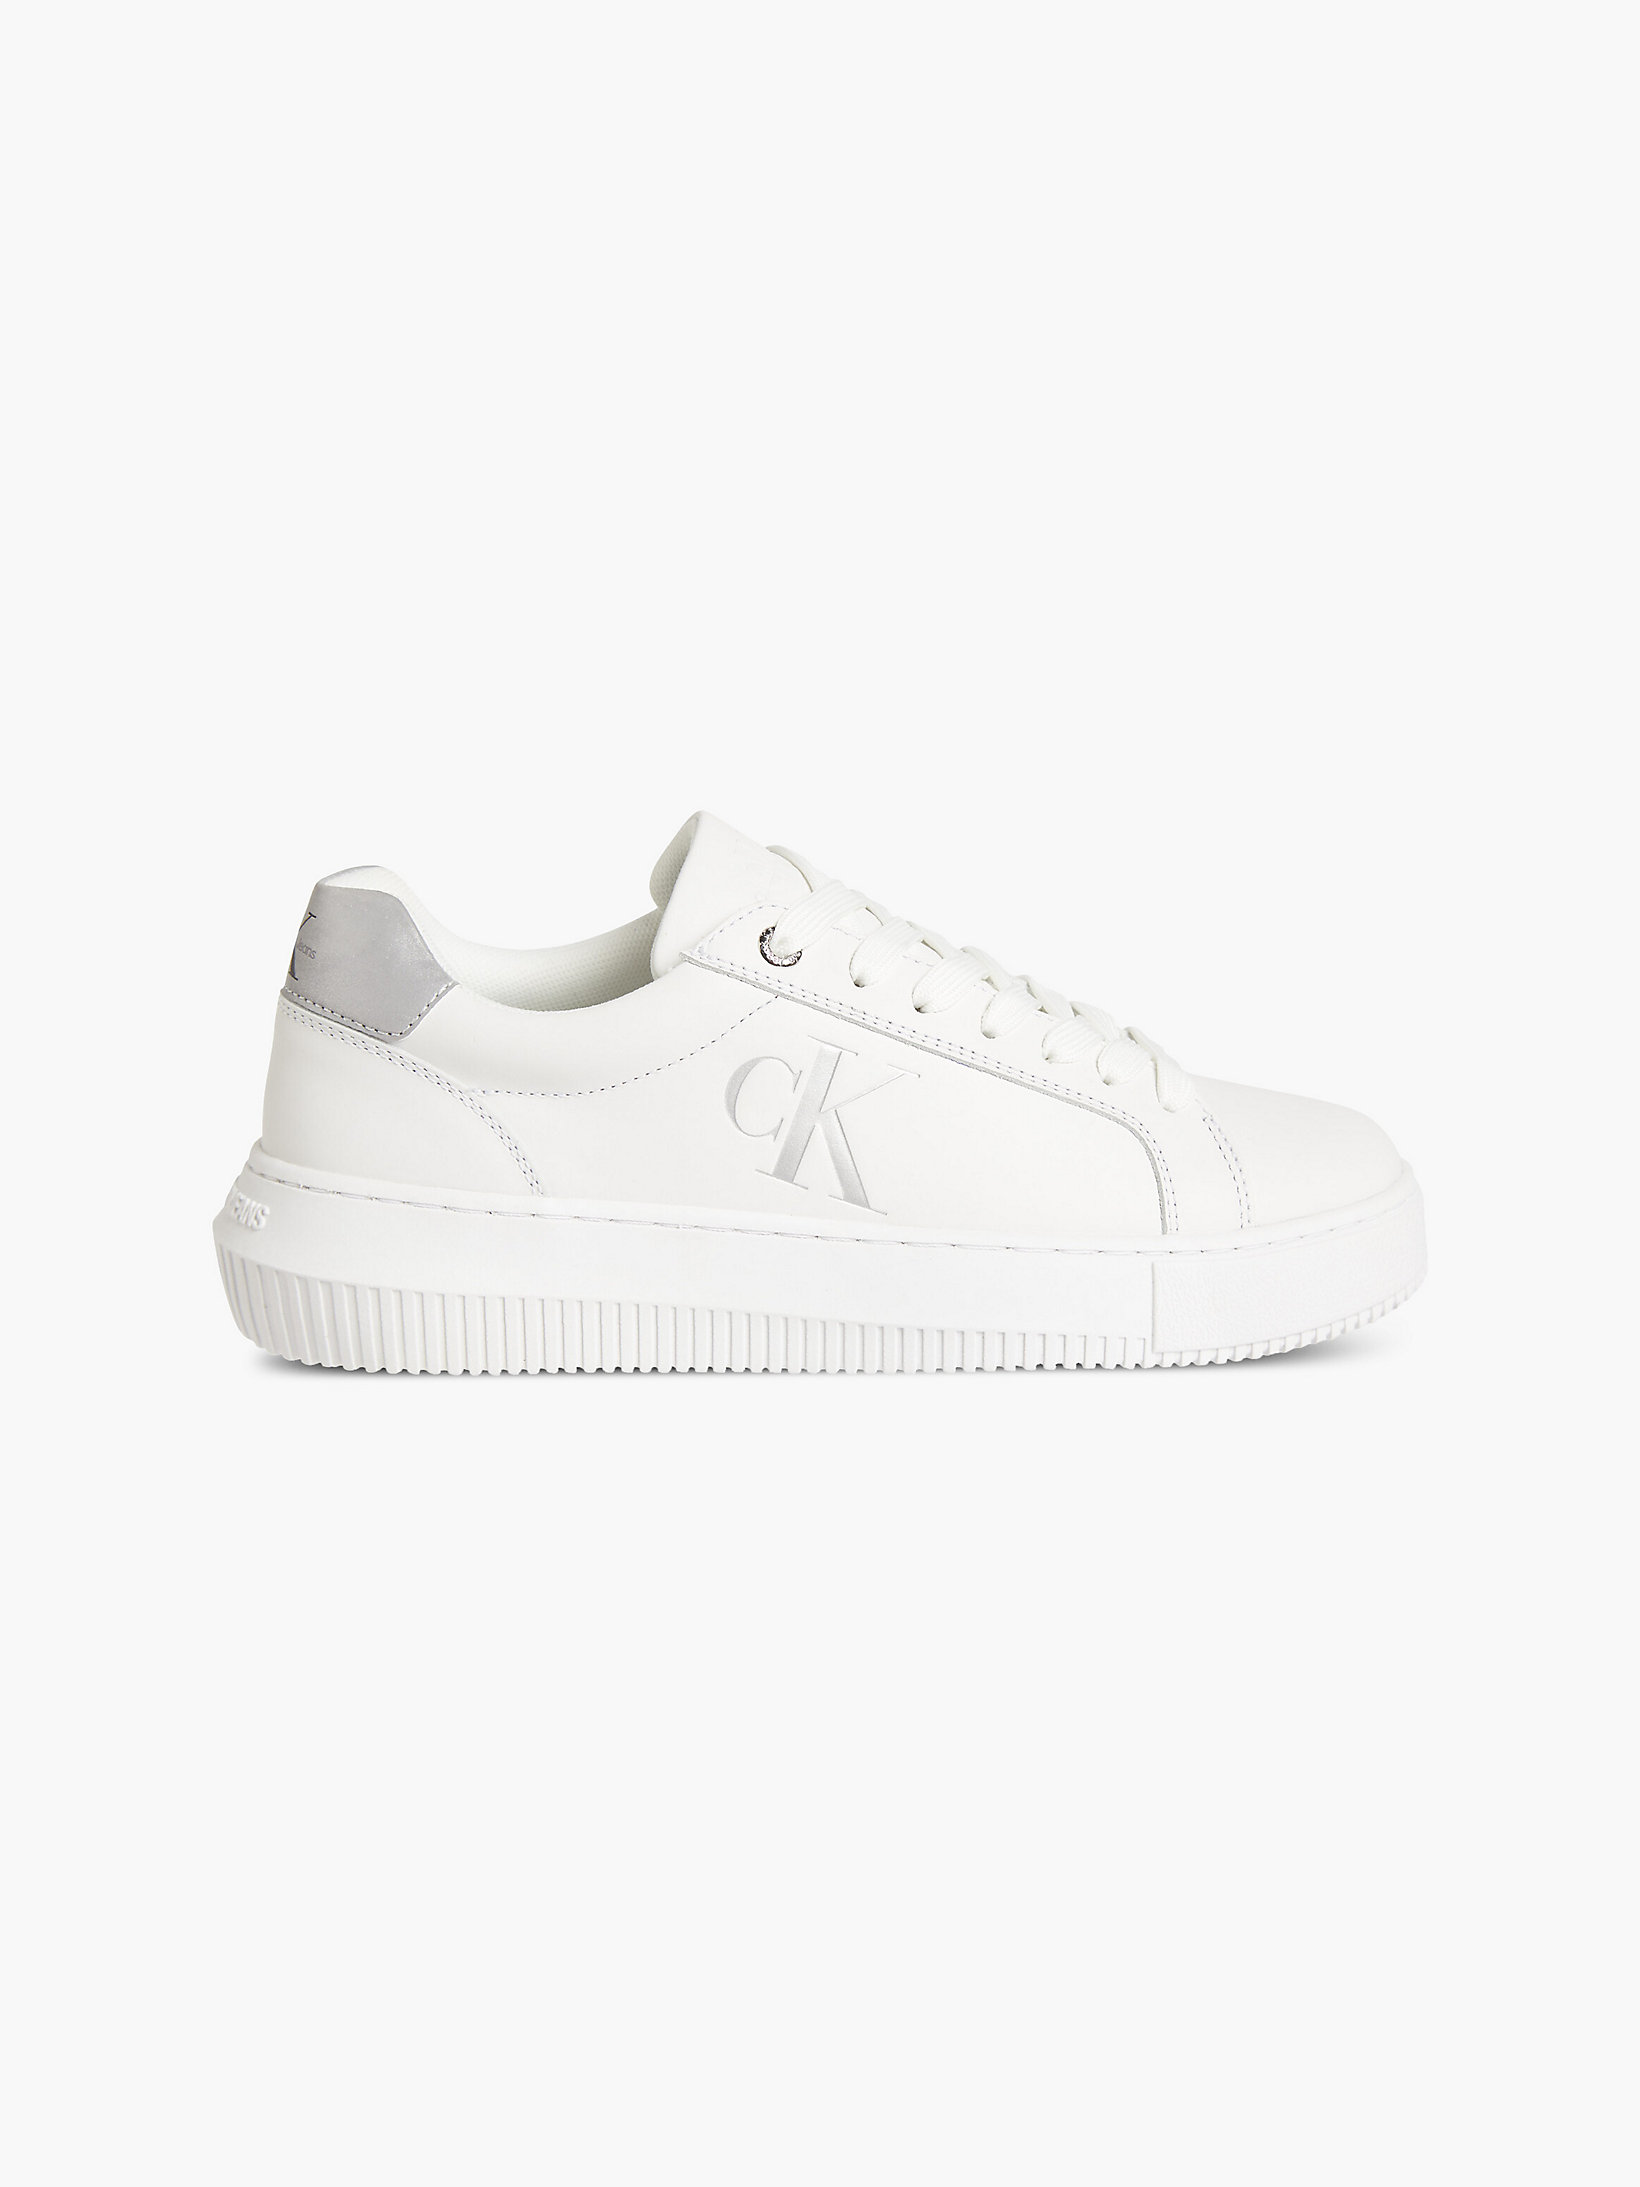 Sneakers In Pelle > White/silver > undefined donna > Calvin Klein